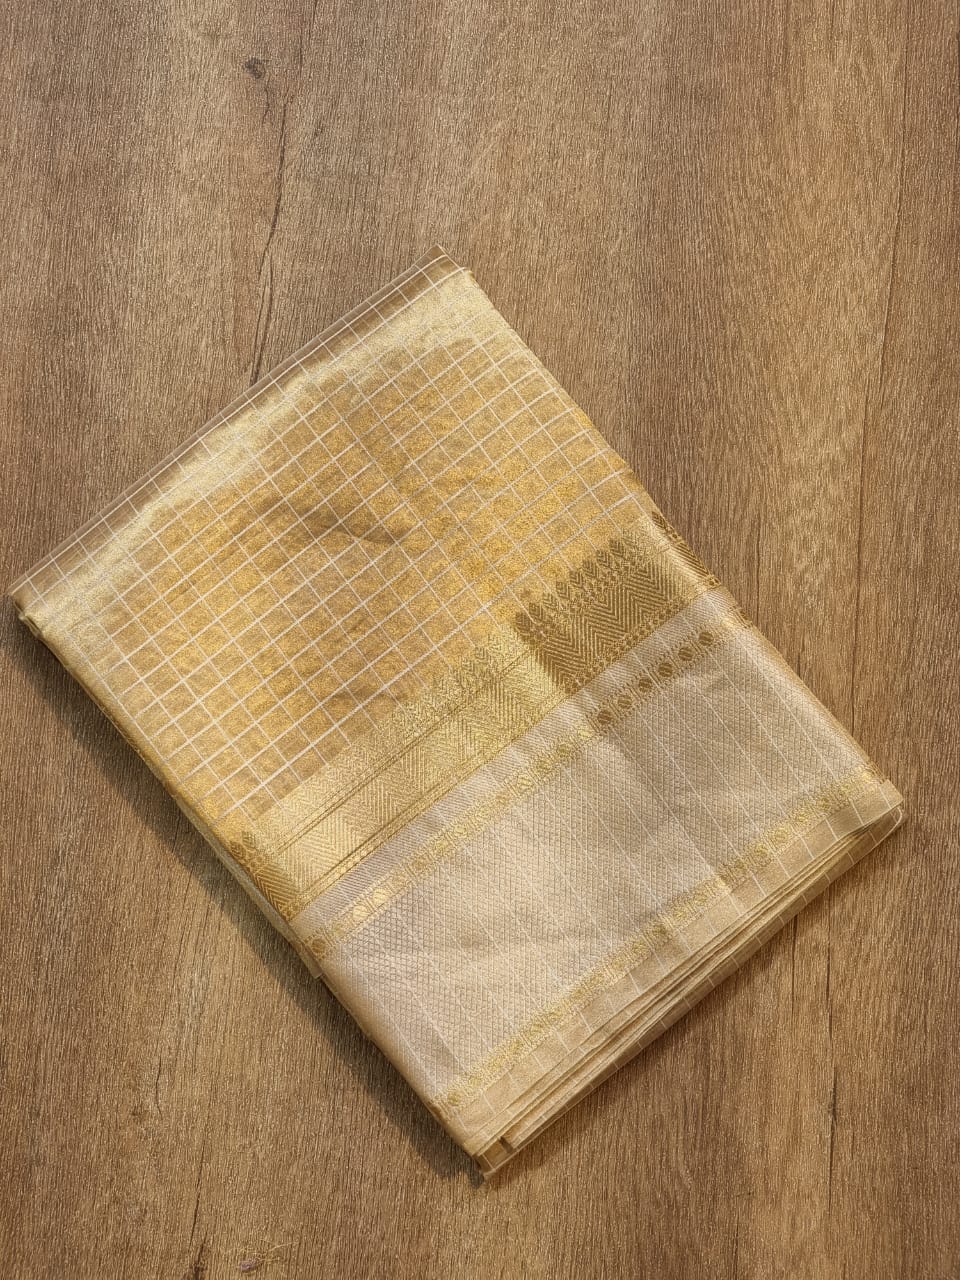 Handwoven Pure Double Tissue Silk Saree with Katan check and Satan border with special tassels and blouse